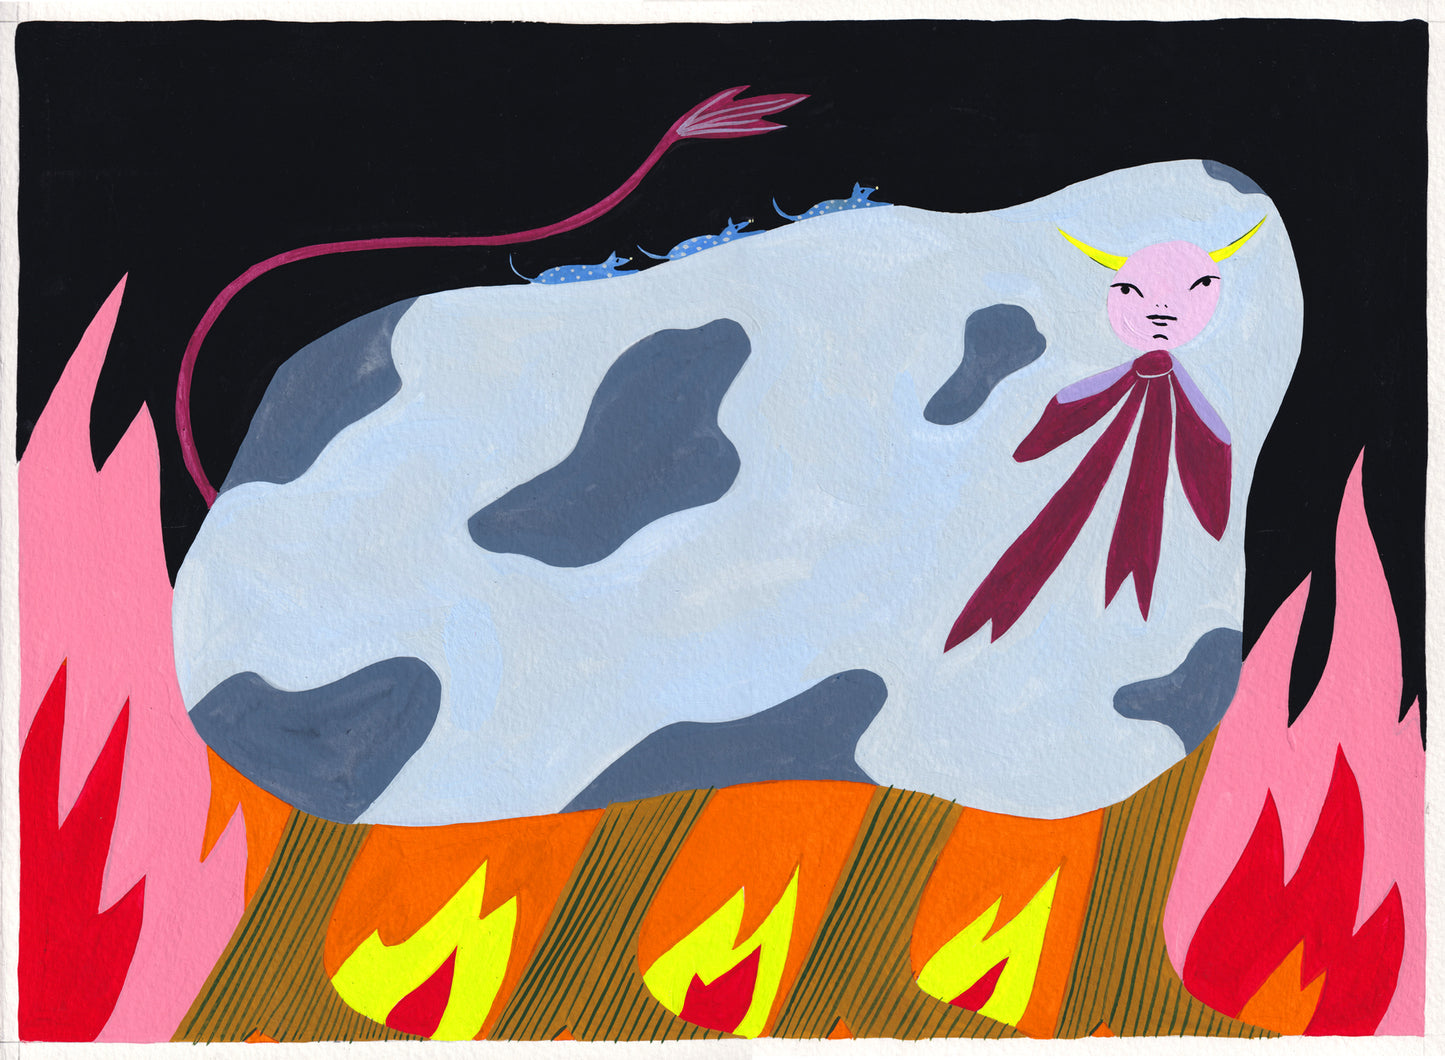 "Cow of the Fiery Inferno and Three Mice"